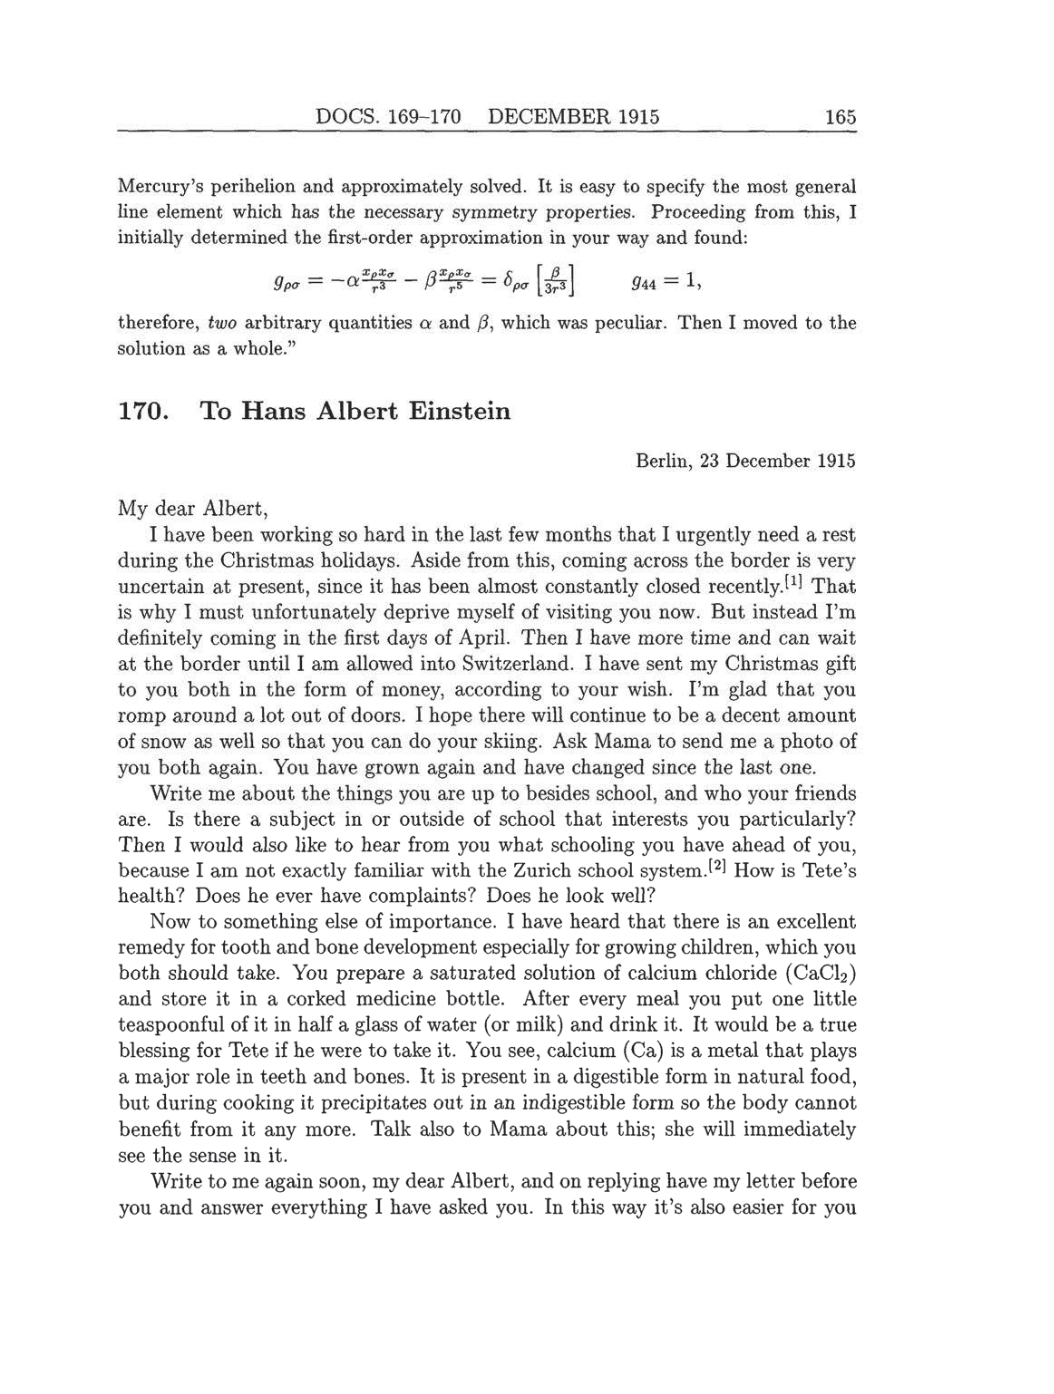 Volume 8: The Berlin Years: Correspondence, 1914-1918 (English translation supplement) page 165